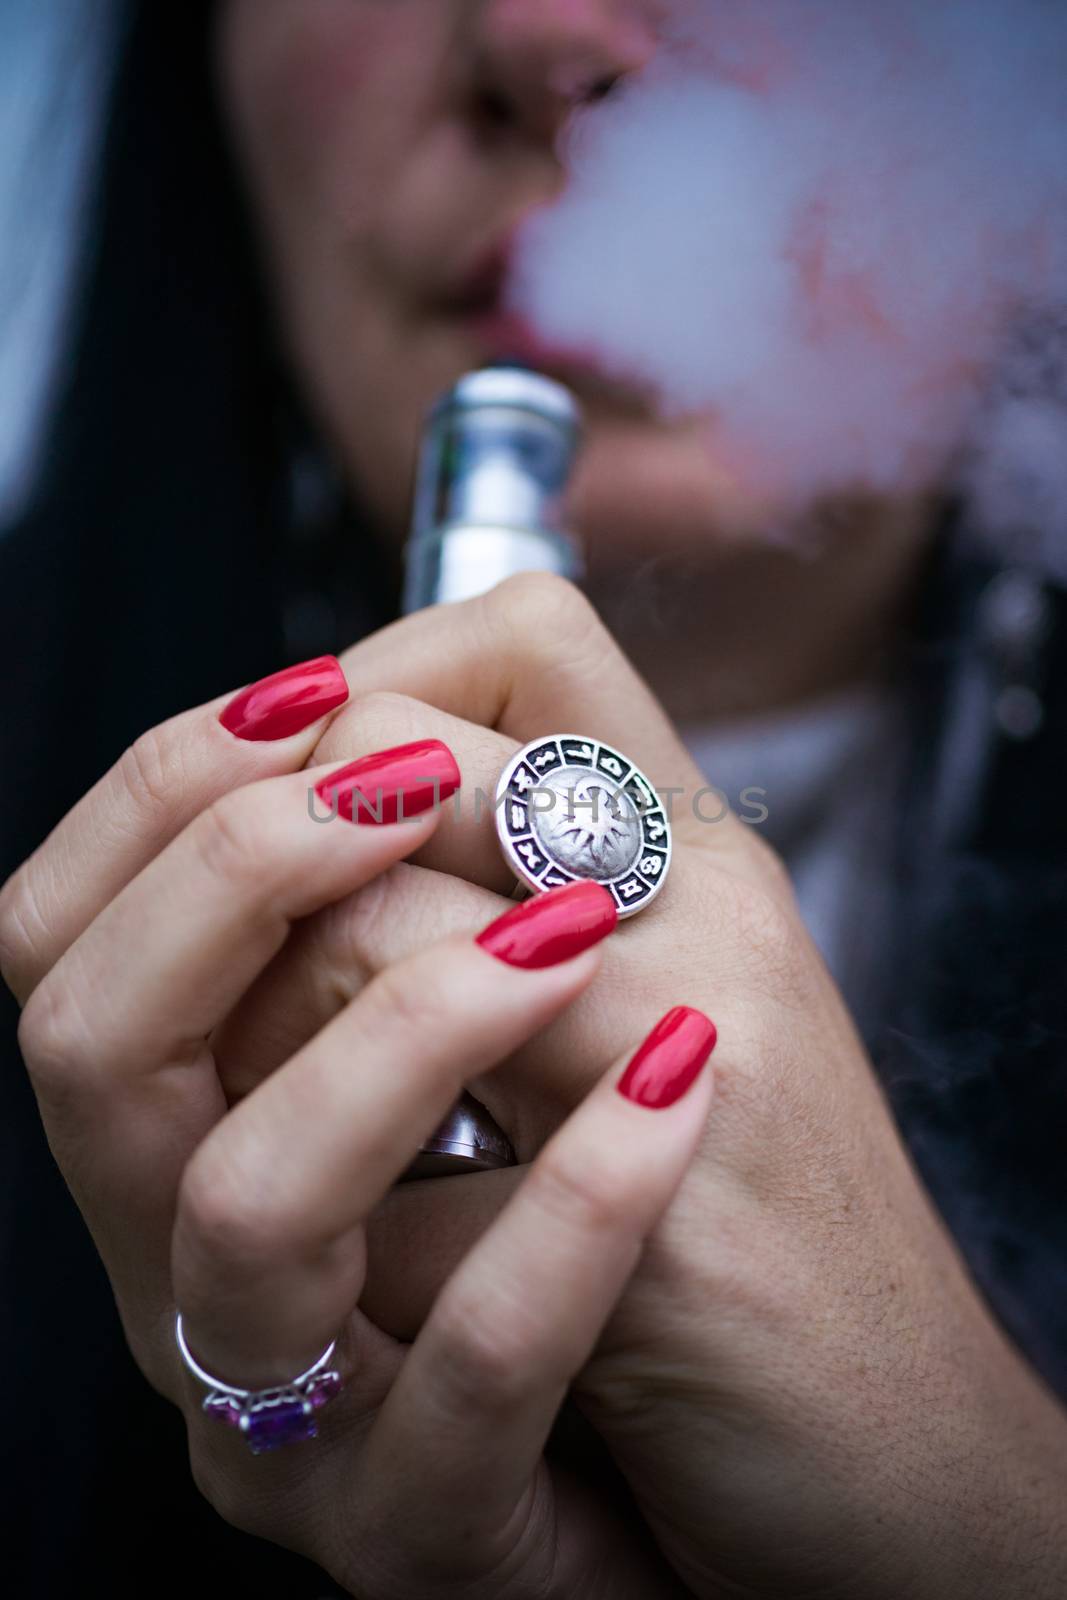 Caucasian woman with red nails manicure and antique ring on finger holds small vape. Smoking alternative vay. Woman exhales thick smoke. Life without cigarettes. Woman-vaper. Small e-cigarette.